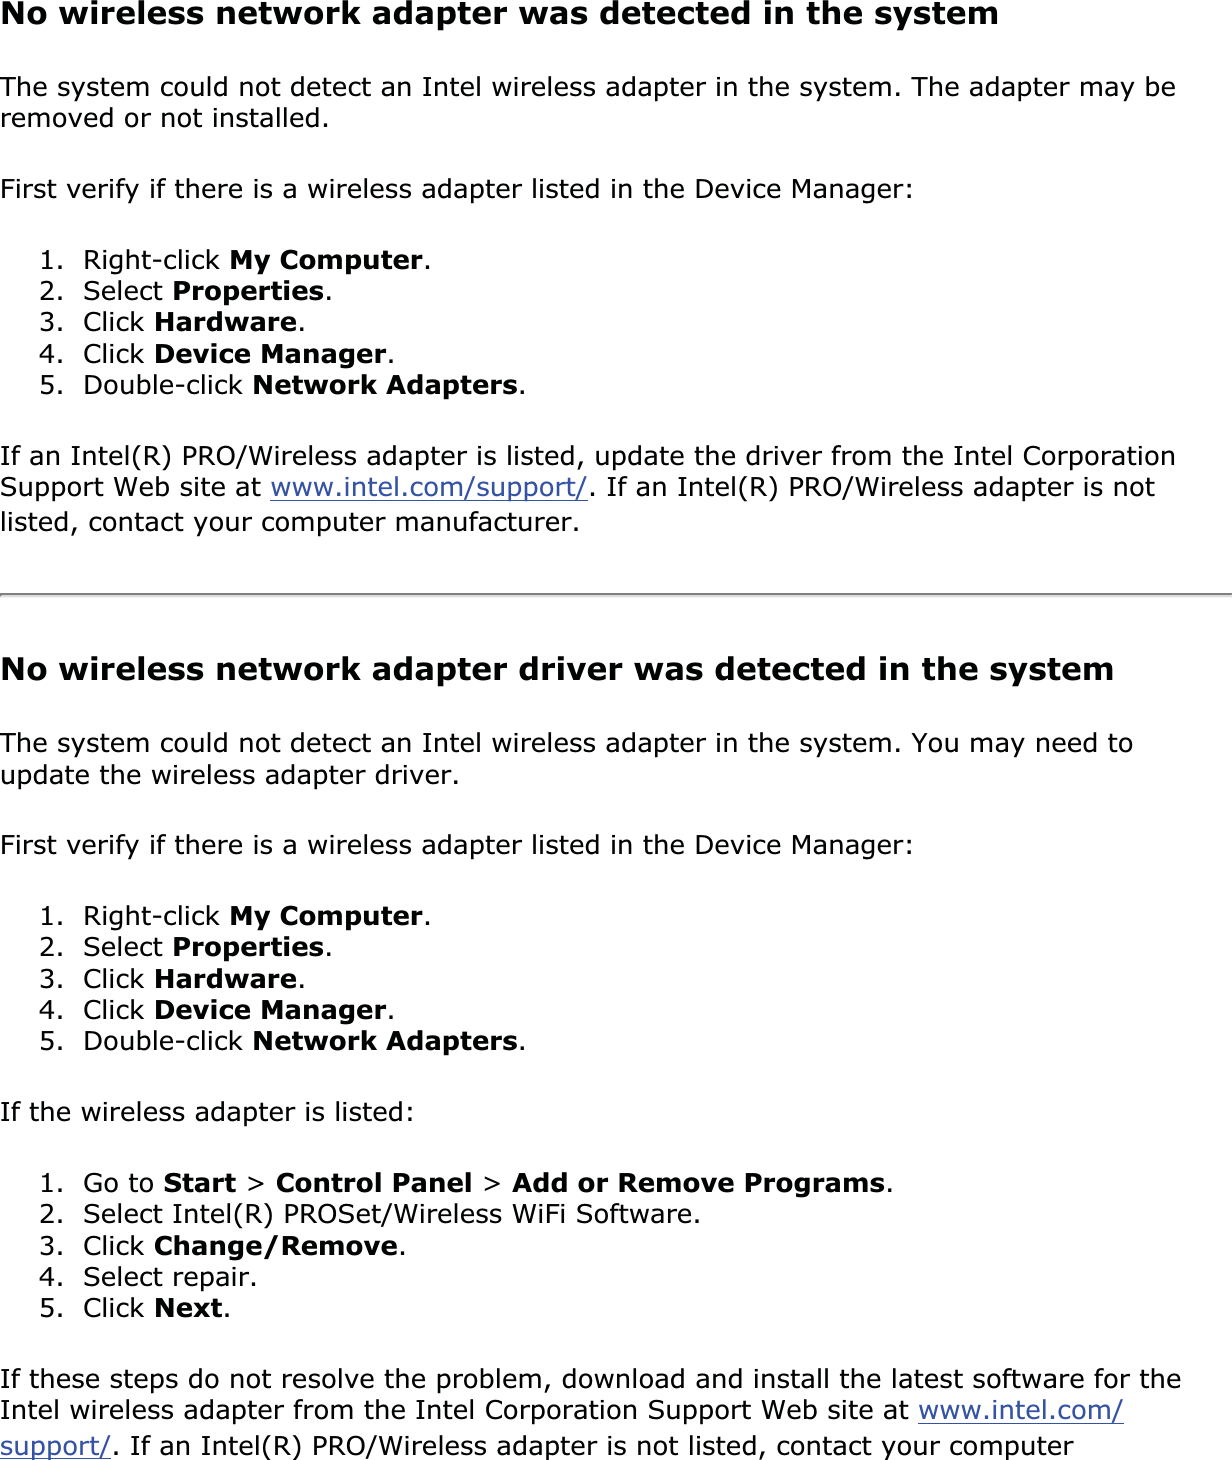 No wireless network adapter was detected in the systemThe system could not detect an Intel wireless adapter in the system. The adapter may be removed or not installed.First verify if there is a wireless adapter listed in the Device Manager:1. Right-click My Computer.2. Select Properties.3. Click Hardware.4. Click Device Manager.5. Double-click Network Adapters.If an Intel(R) PRO/Wireless adapter is listed, update the driver from the Intel Corporation Support Web site at www.intel.com/support/. If an Intel(R) PRO/Wireless adapter is not listed, contact your computer manufacturer.No wireless network adapter driver was detected in the systemThe system could not detect an Intel wireless adapter in the system. You may need to update the wireless adapter driver. First verify if there is a wireless adapter listed in the Device Manager:1. Right-click My Computer.2. Select Properties.3. Click Hardware.4. Click Device Manager.5. Double-click Network Adapters.If the wireless adapter is listed: 1. Go to Start &gt; Control Panel &gt;Add or Remove Programs.2. Select Intel(R) PROSet/Wireless WiFi Software.3. Click Change/Remove.4. Select repair.5. Click Next.If these steps do not resolve the problem, download and install the latest software for the Intel wireless adapter from the Intel Corporation Support Web site at www.intel.com/support/. If an Intel(R) PRO/Wireless adapter is not listed, contact your computer 